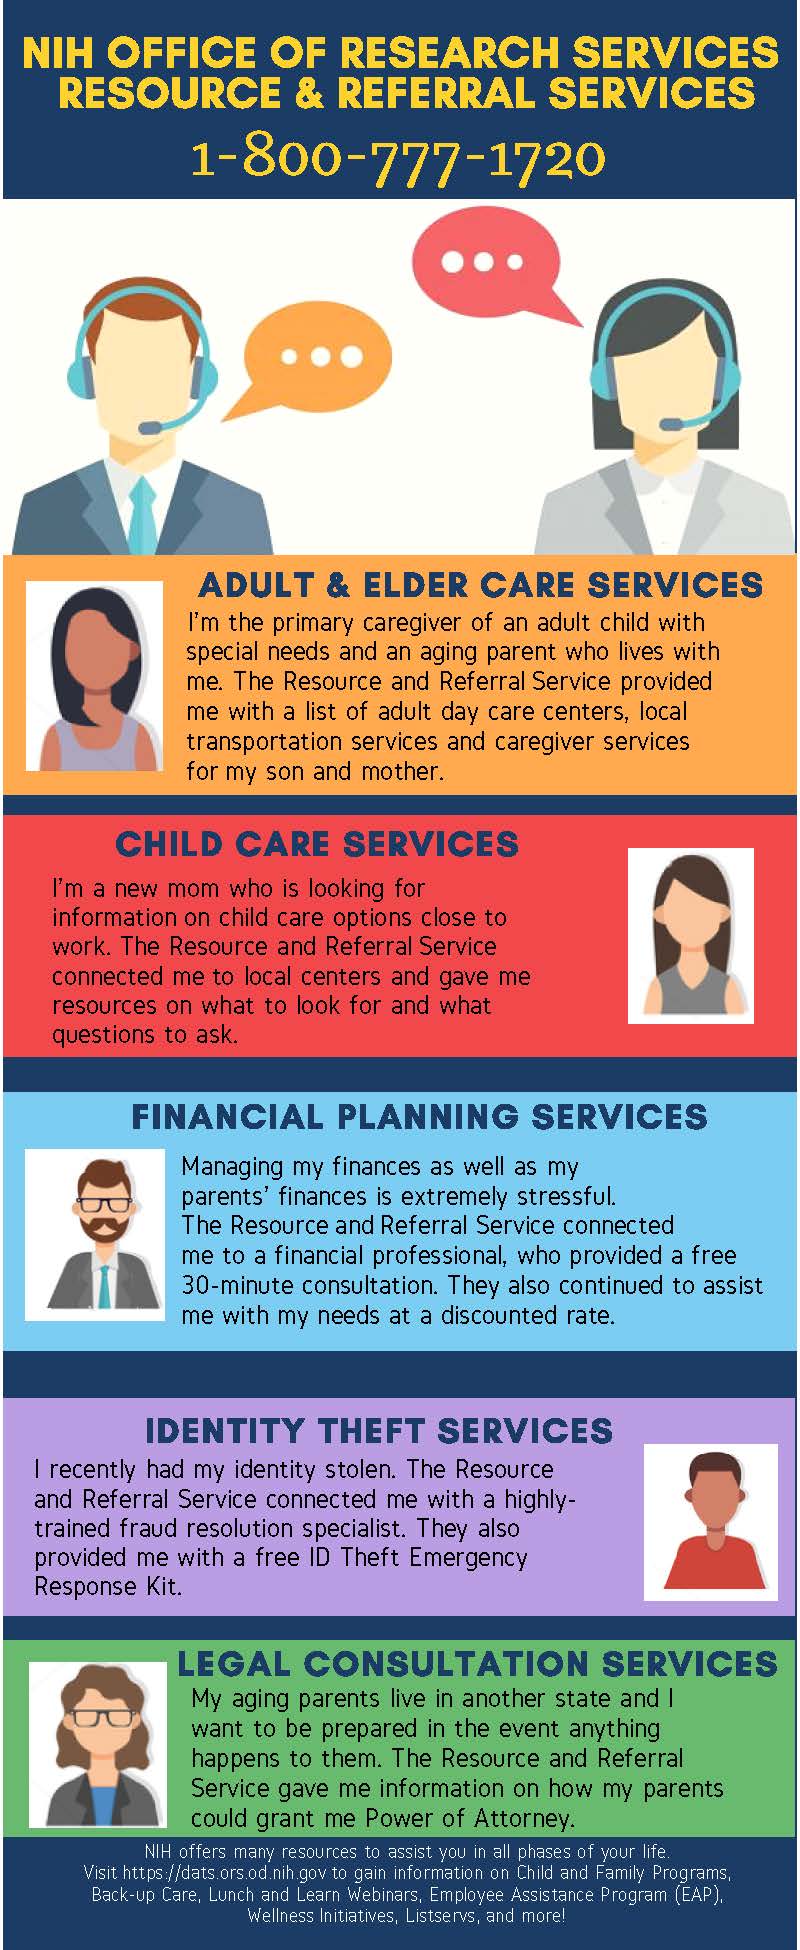 NIH ORS Resource and Referral Services Infographic